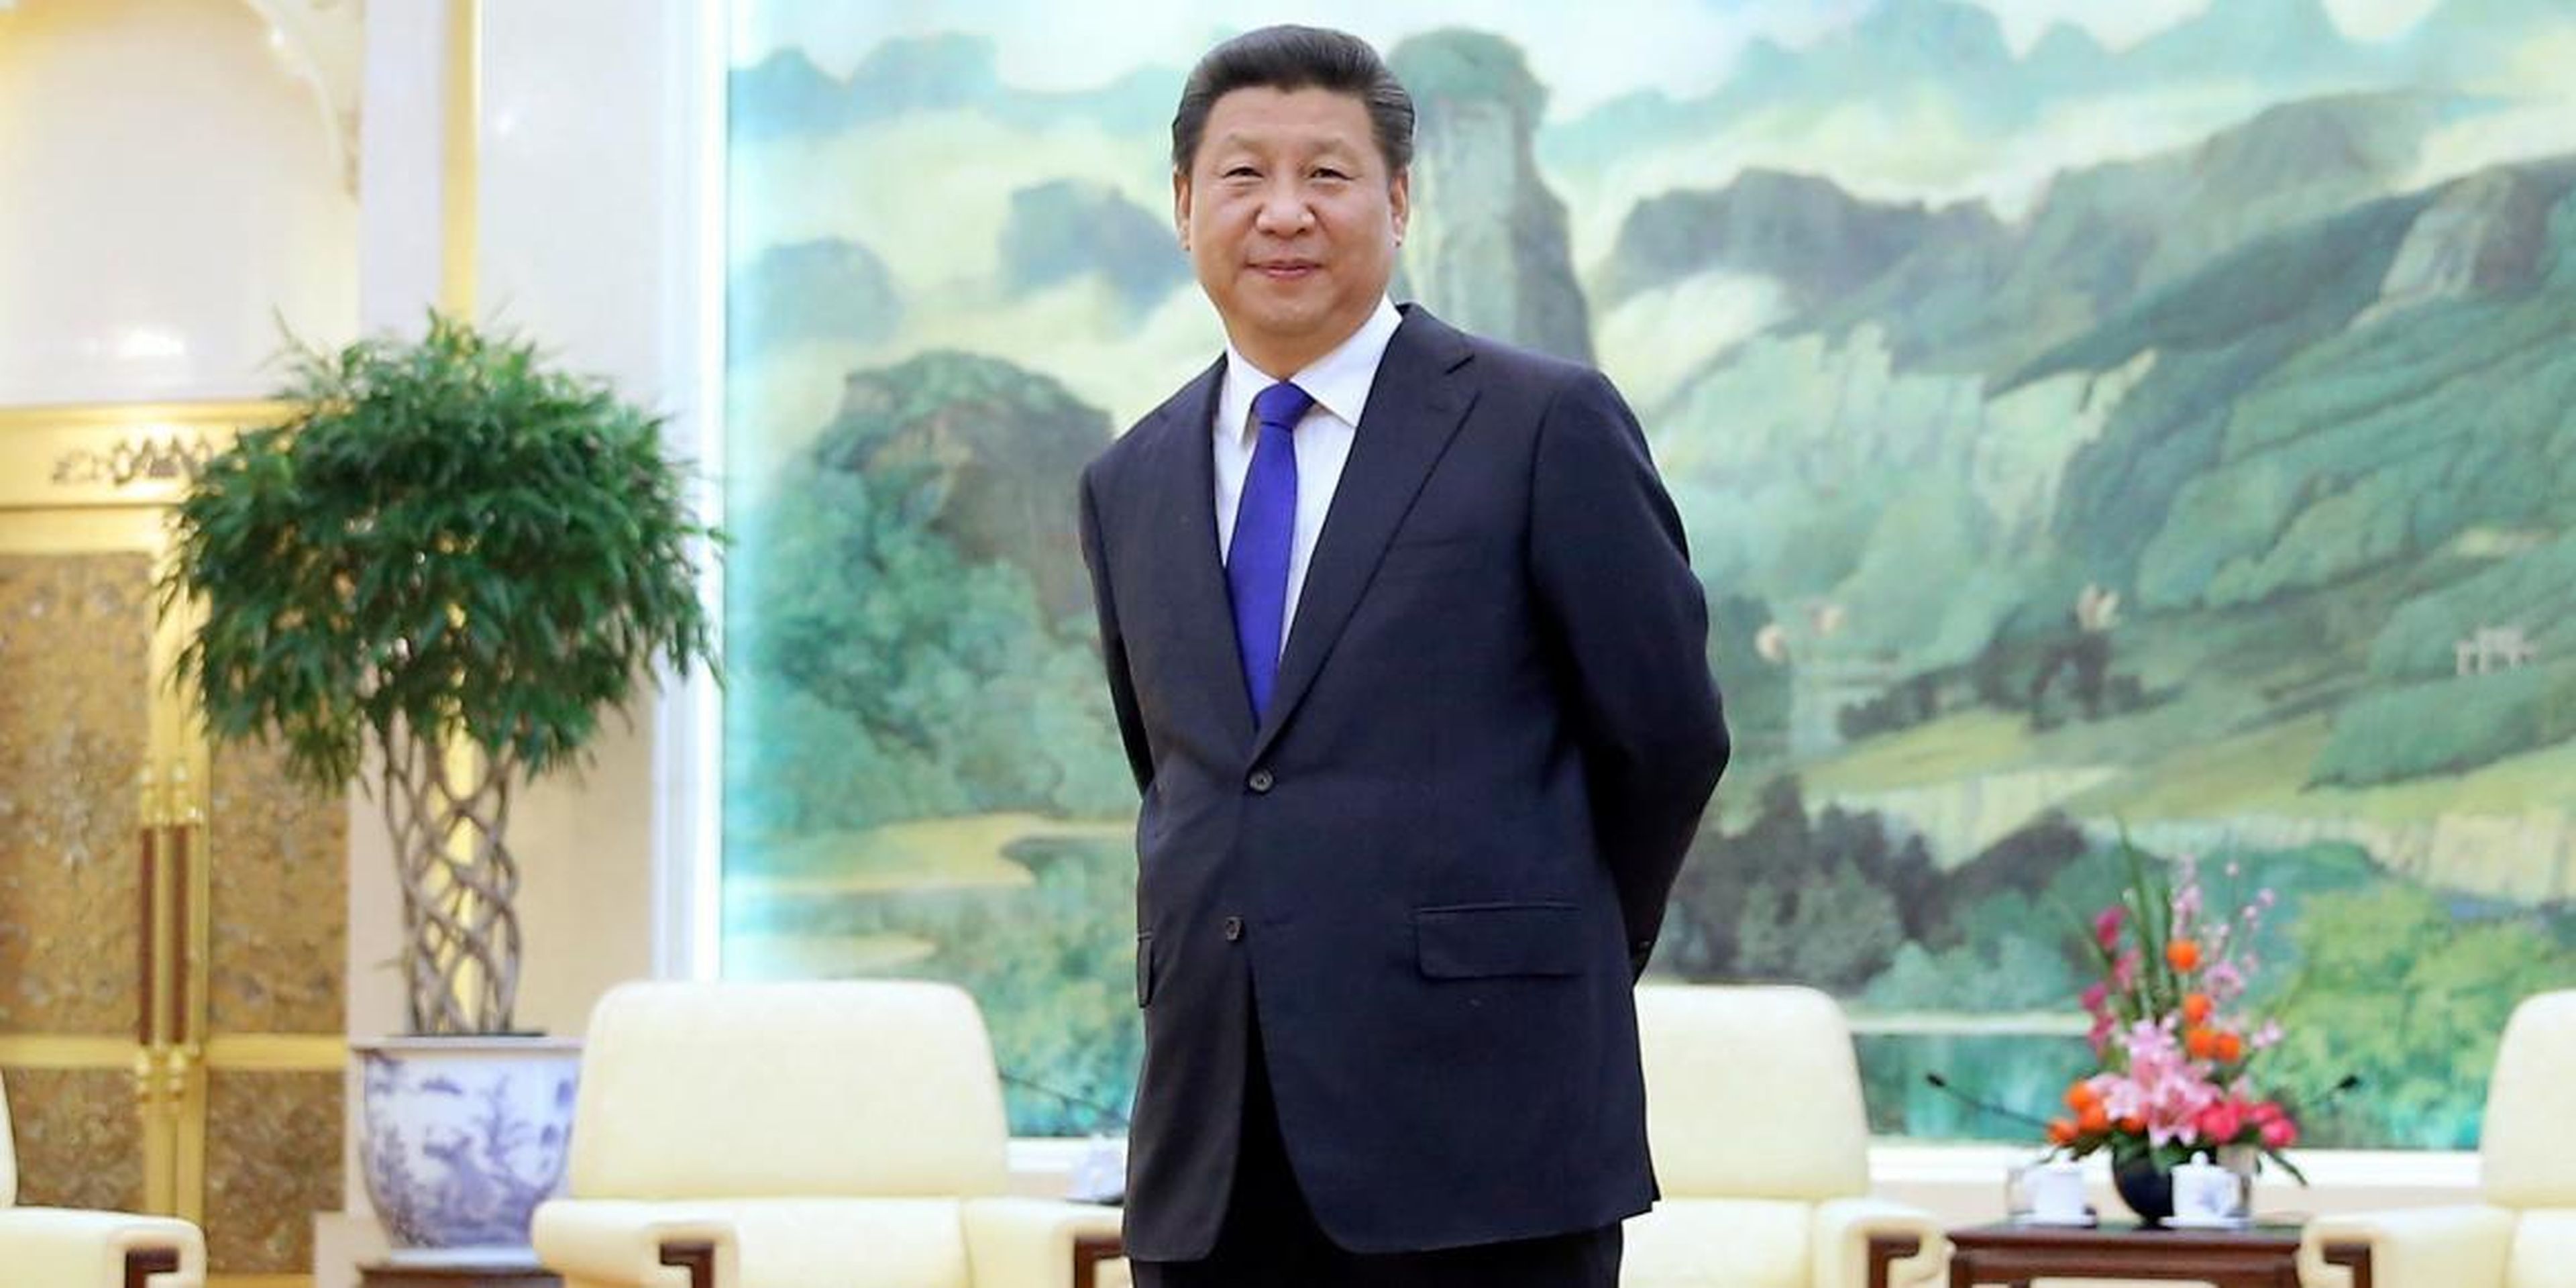 Xi Jinping has stepped up China's war on drugs.